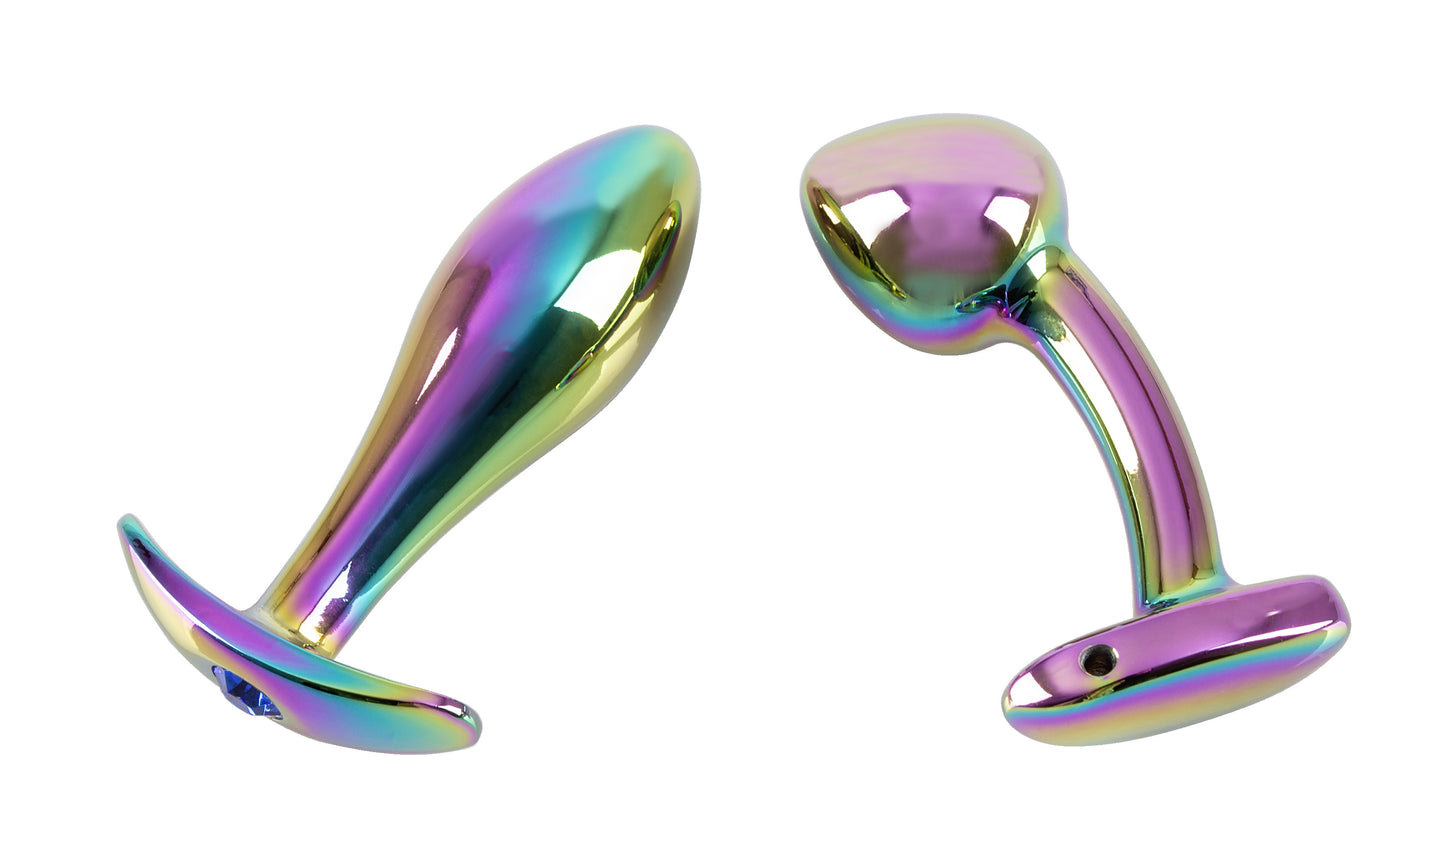 Anos Metal Butt Plug Set in Rainbow Colours